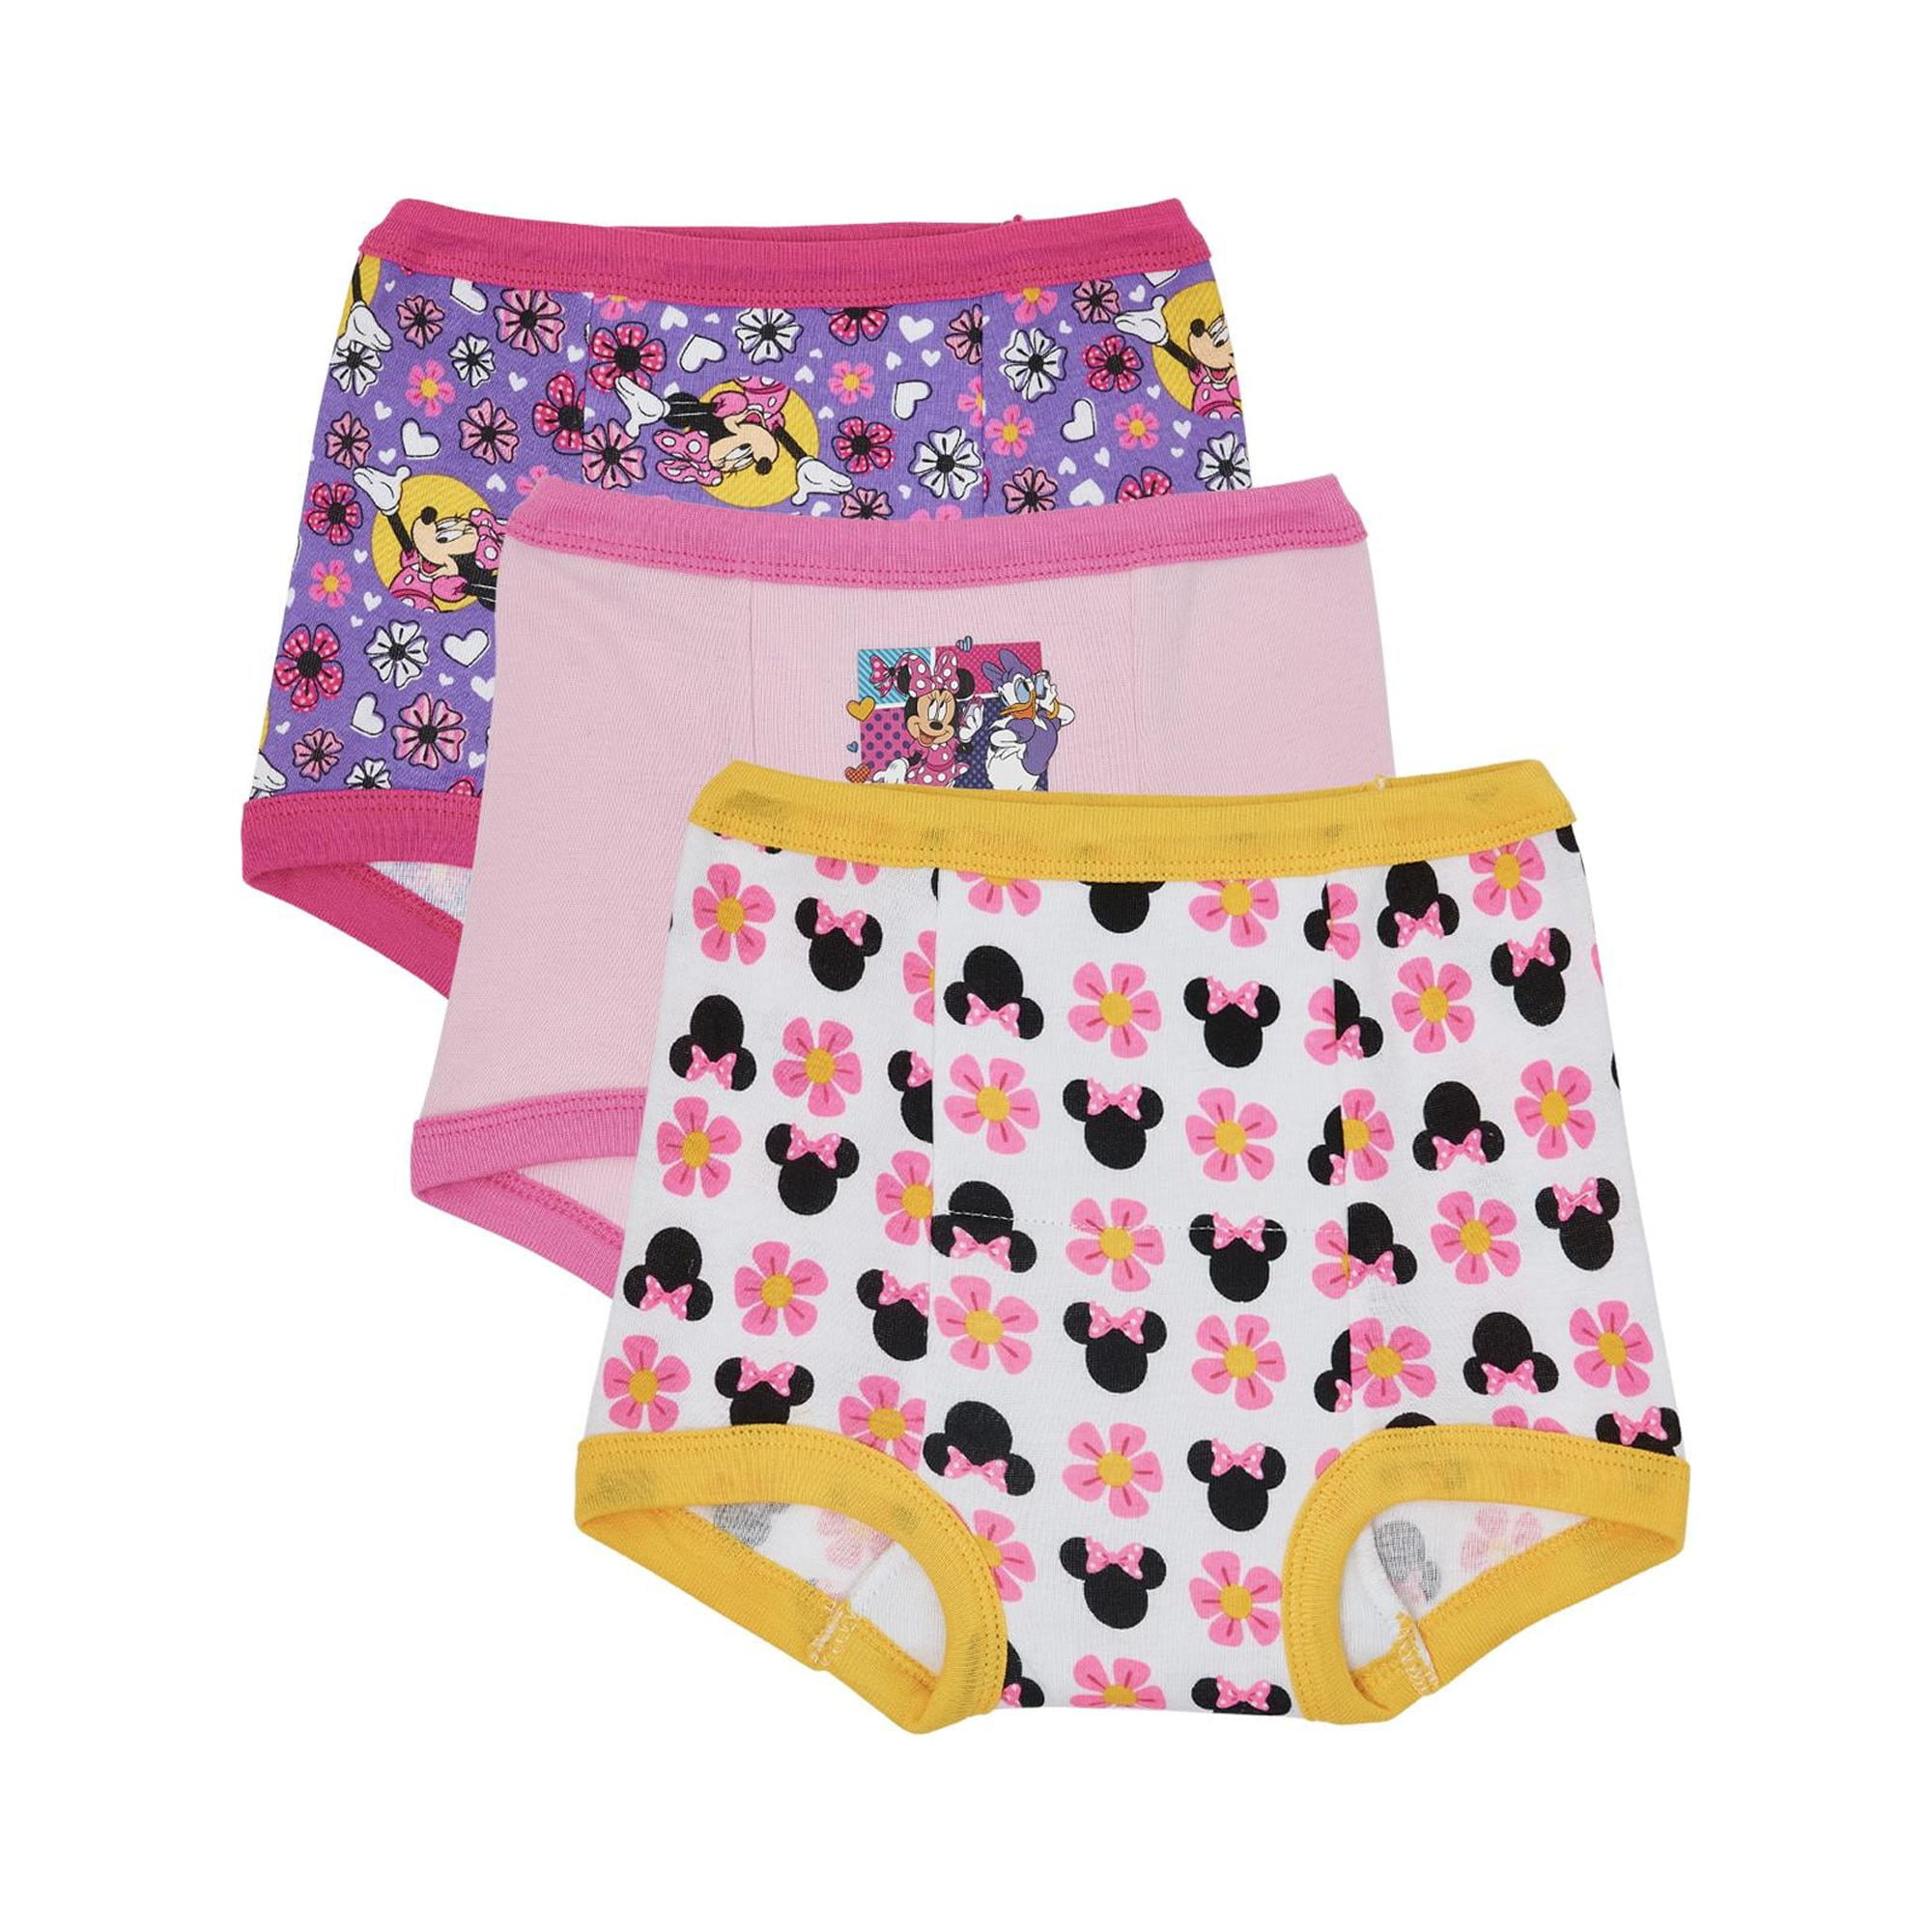 Minnie Mouse Toddler Girls Training Pants, 3-Pack 